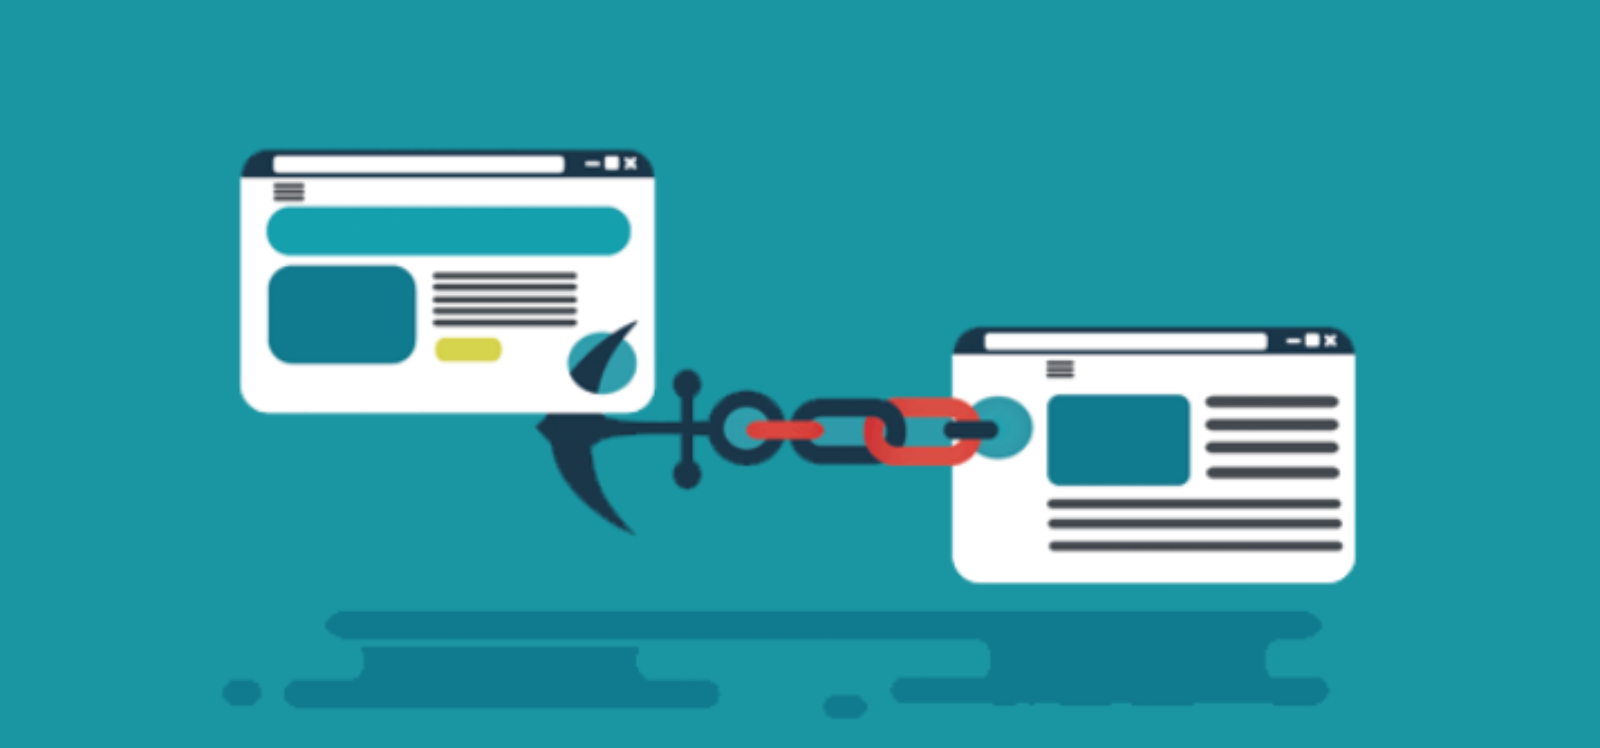 How To Use Anchor Text Links